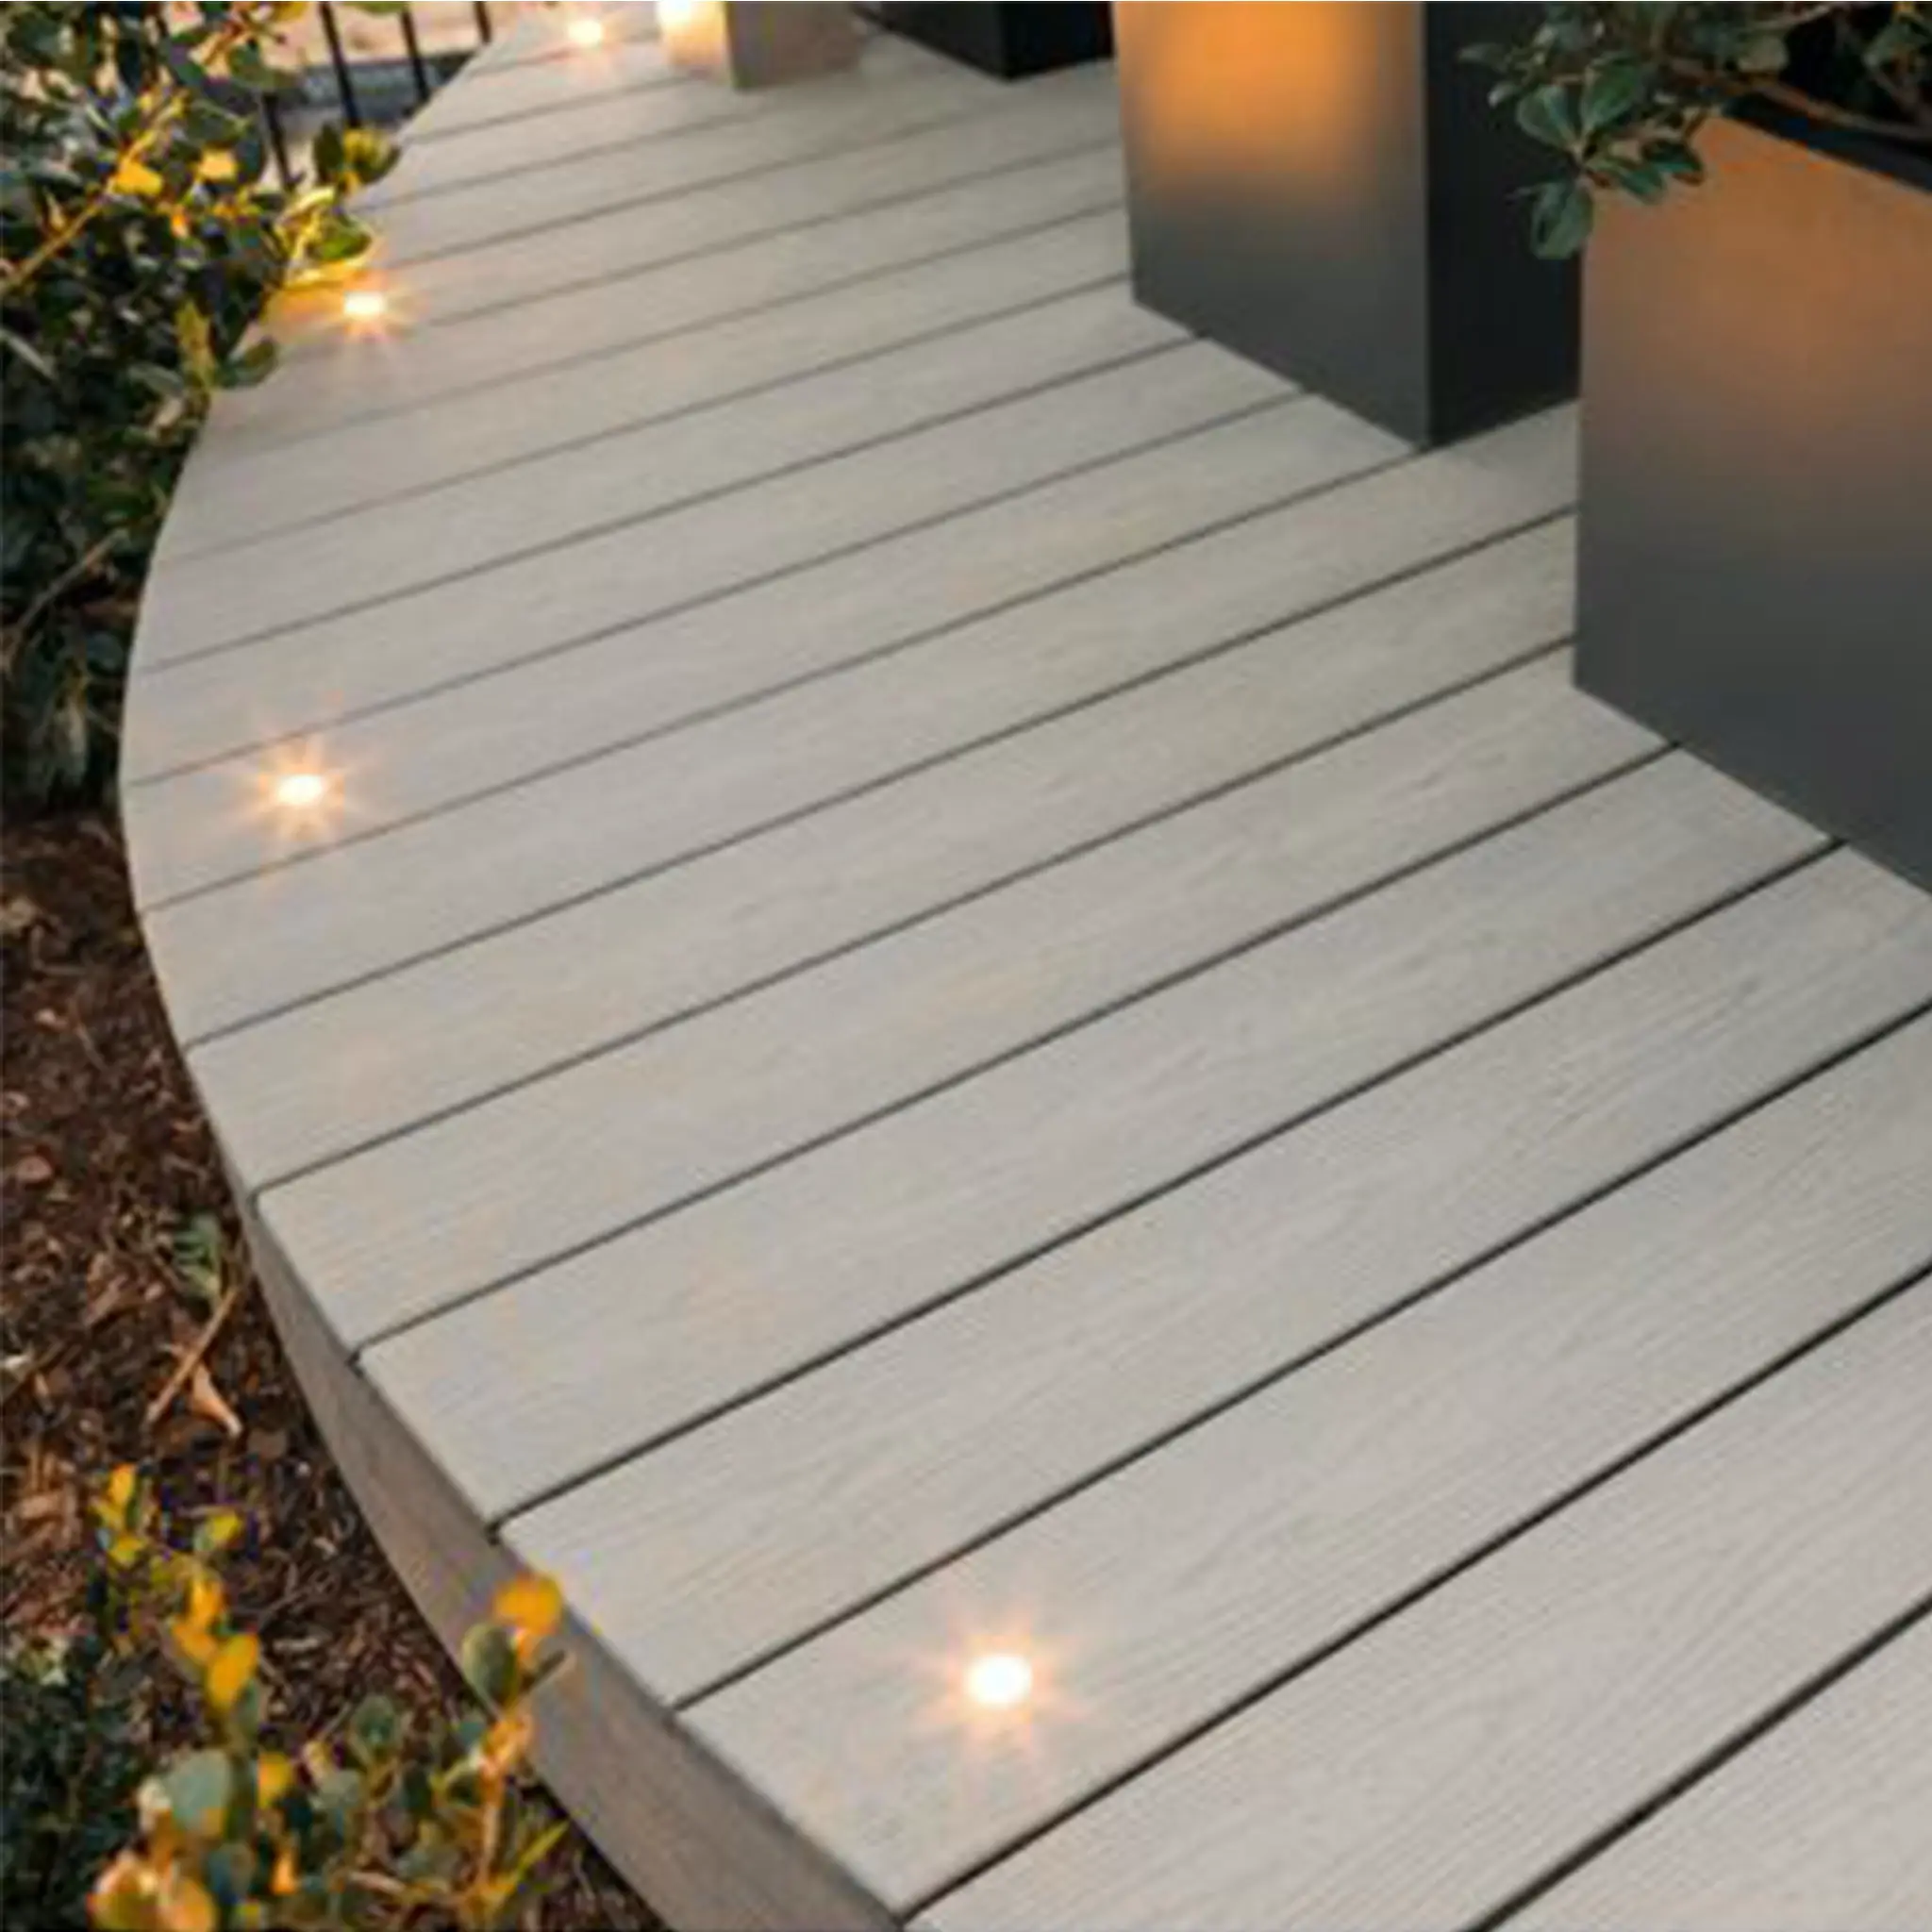 Illuminate Your Deck with Trex: Stunning Results 2